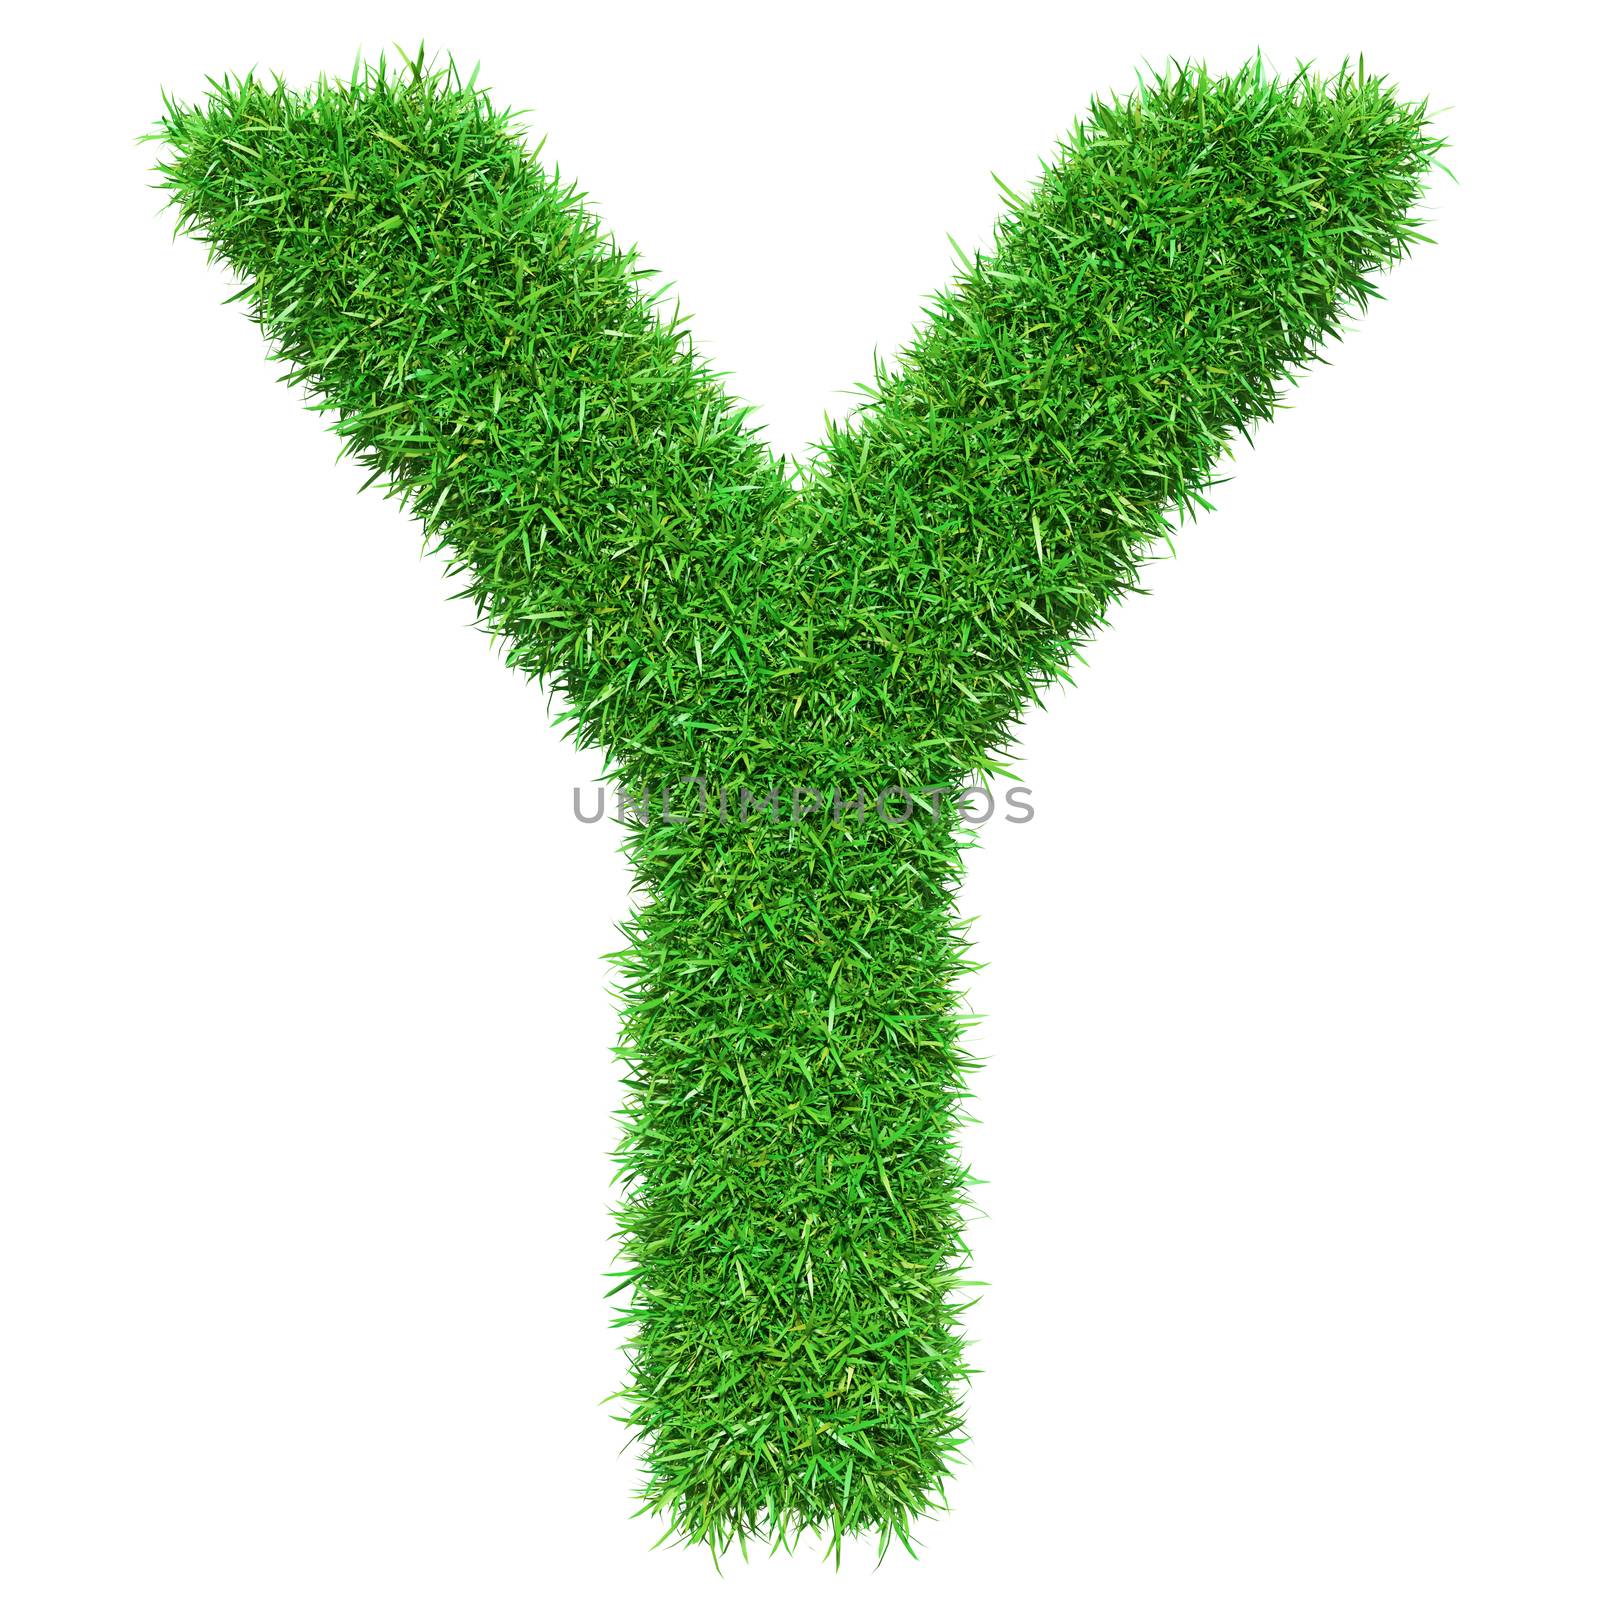 Green Grass Letter Y by cherezoff